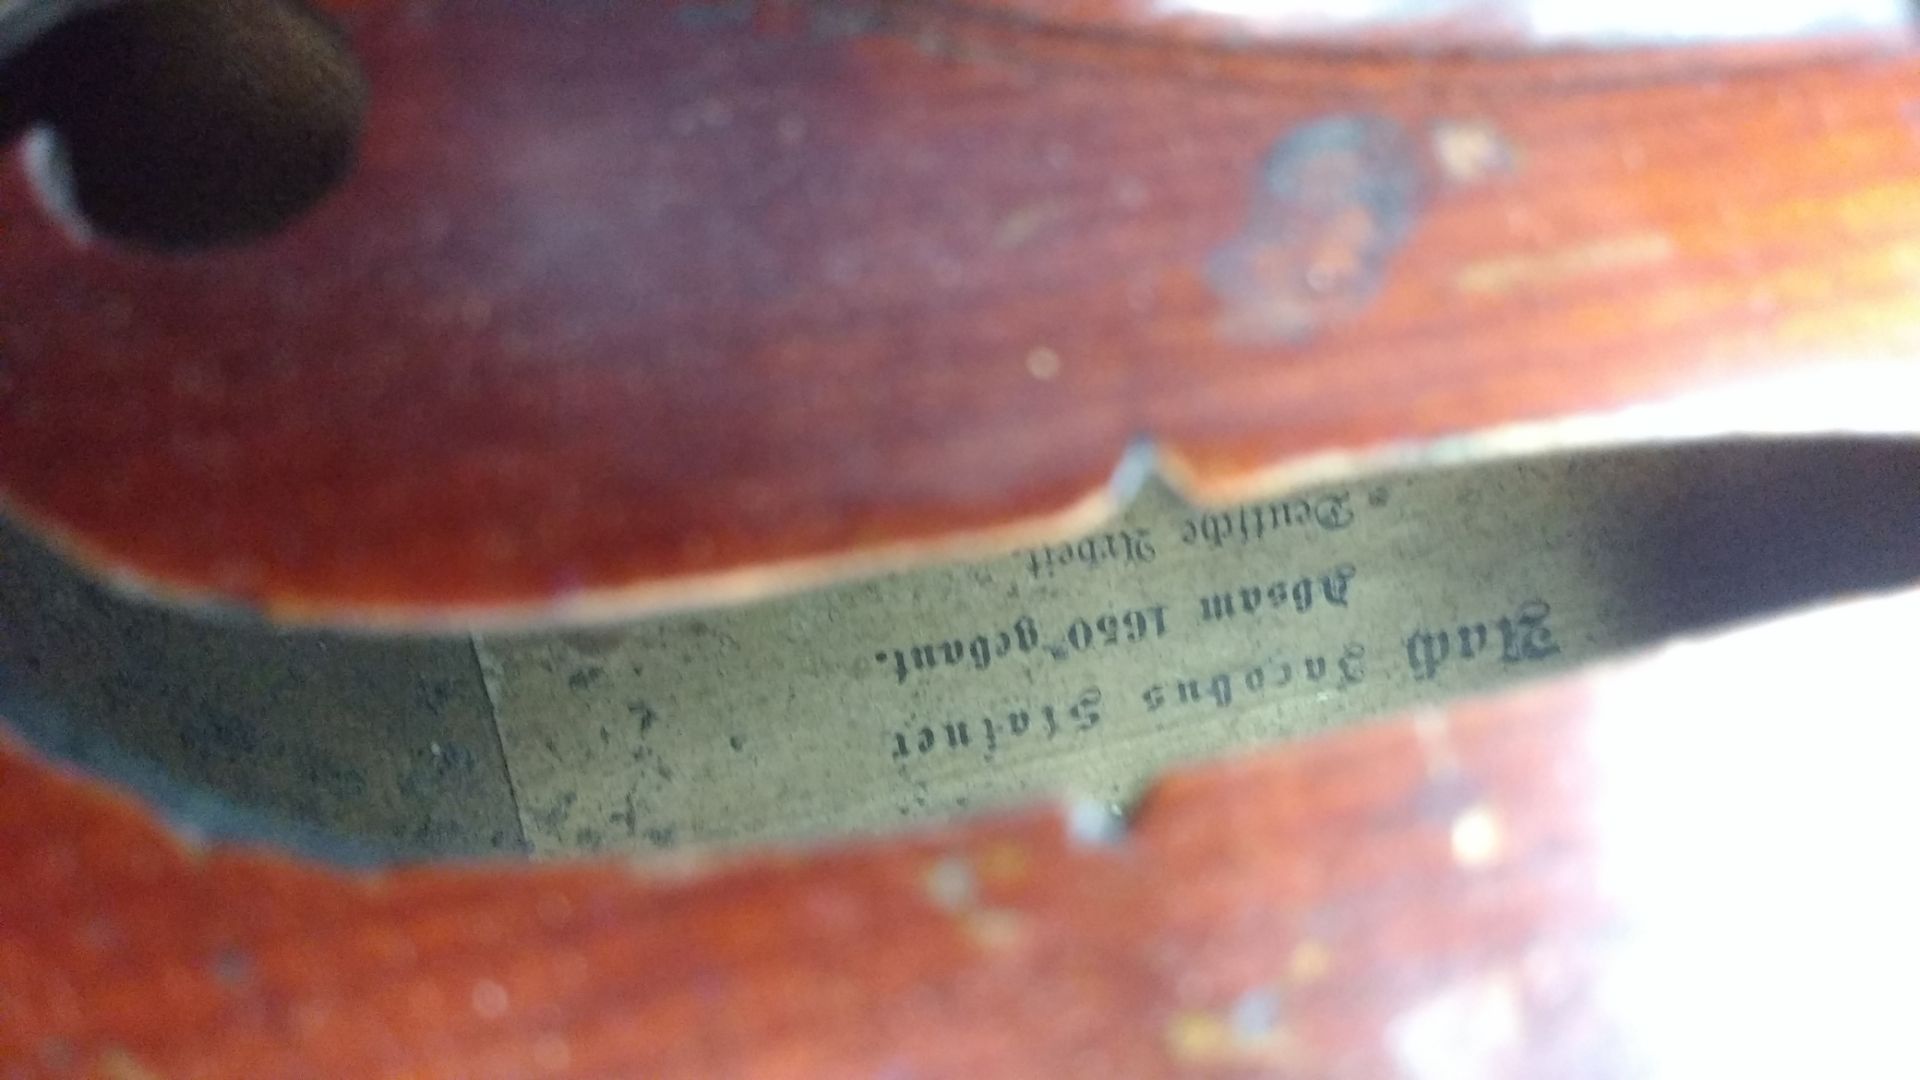 Nadi Jacobus Stainer Labeled Violin 1650 ***Reserve lowered 23.5.18*** - Image 3 of 8